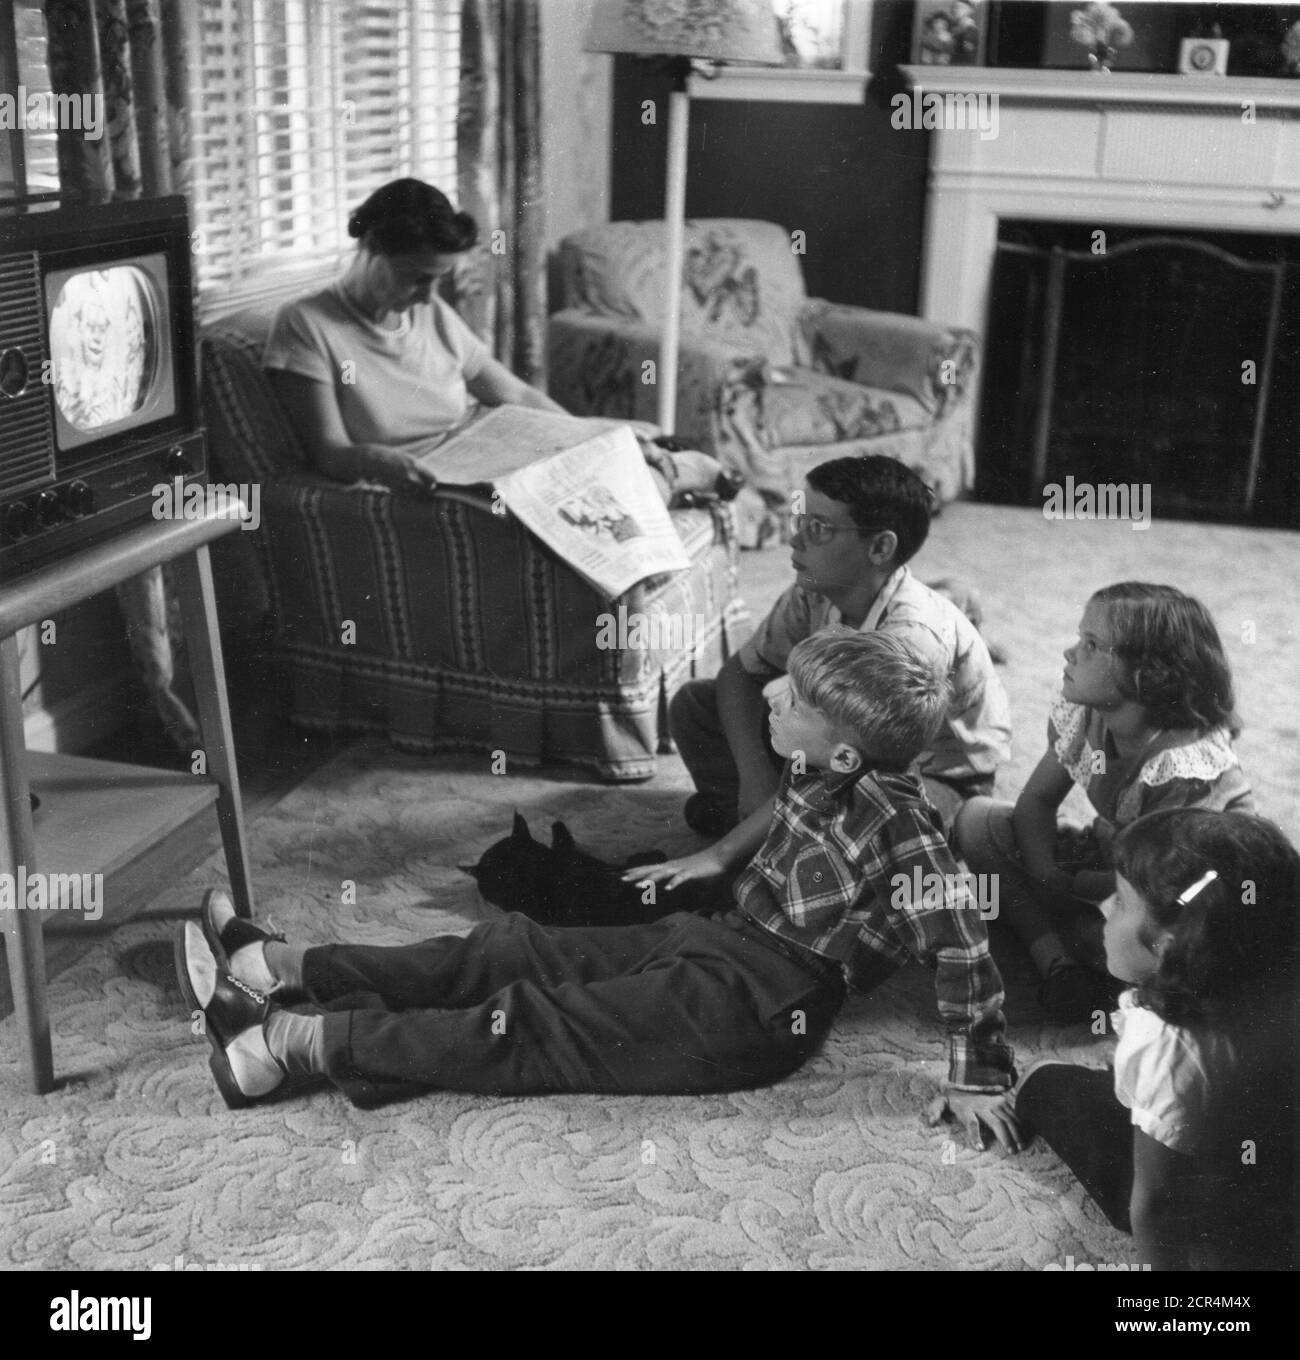 A family - mother, four children and pet - enjoy the television in their living room, Washington, DC, 1955. (Photo by RBM Vintage Images) Stock Photo